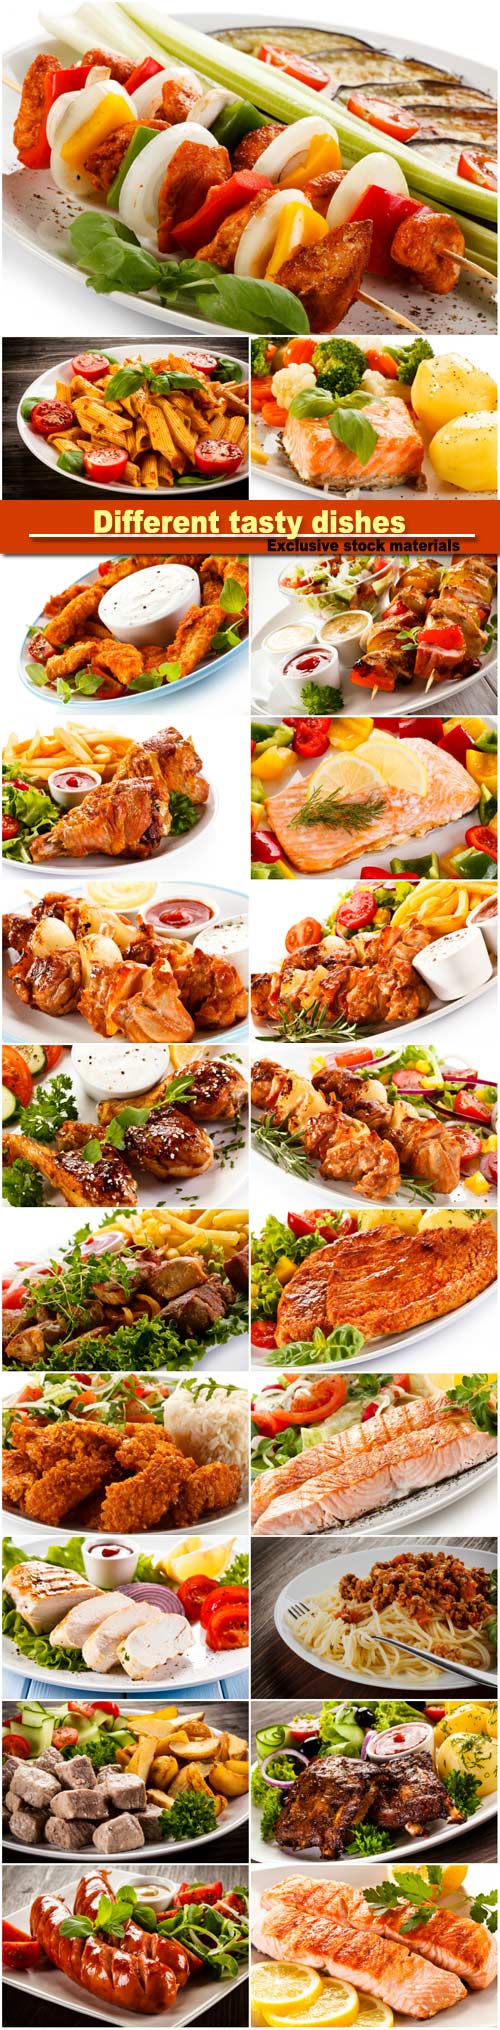 Set of different tasty dishes, fish, meat, vegetables